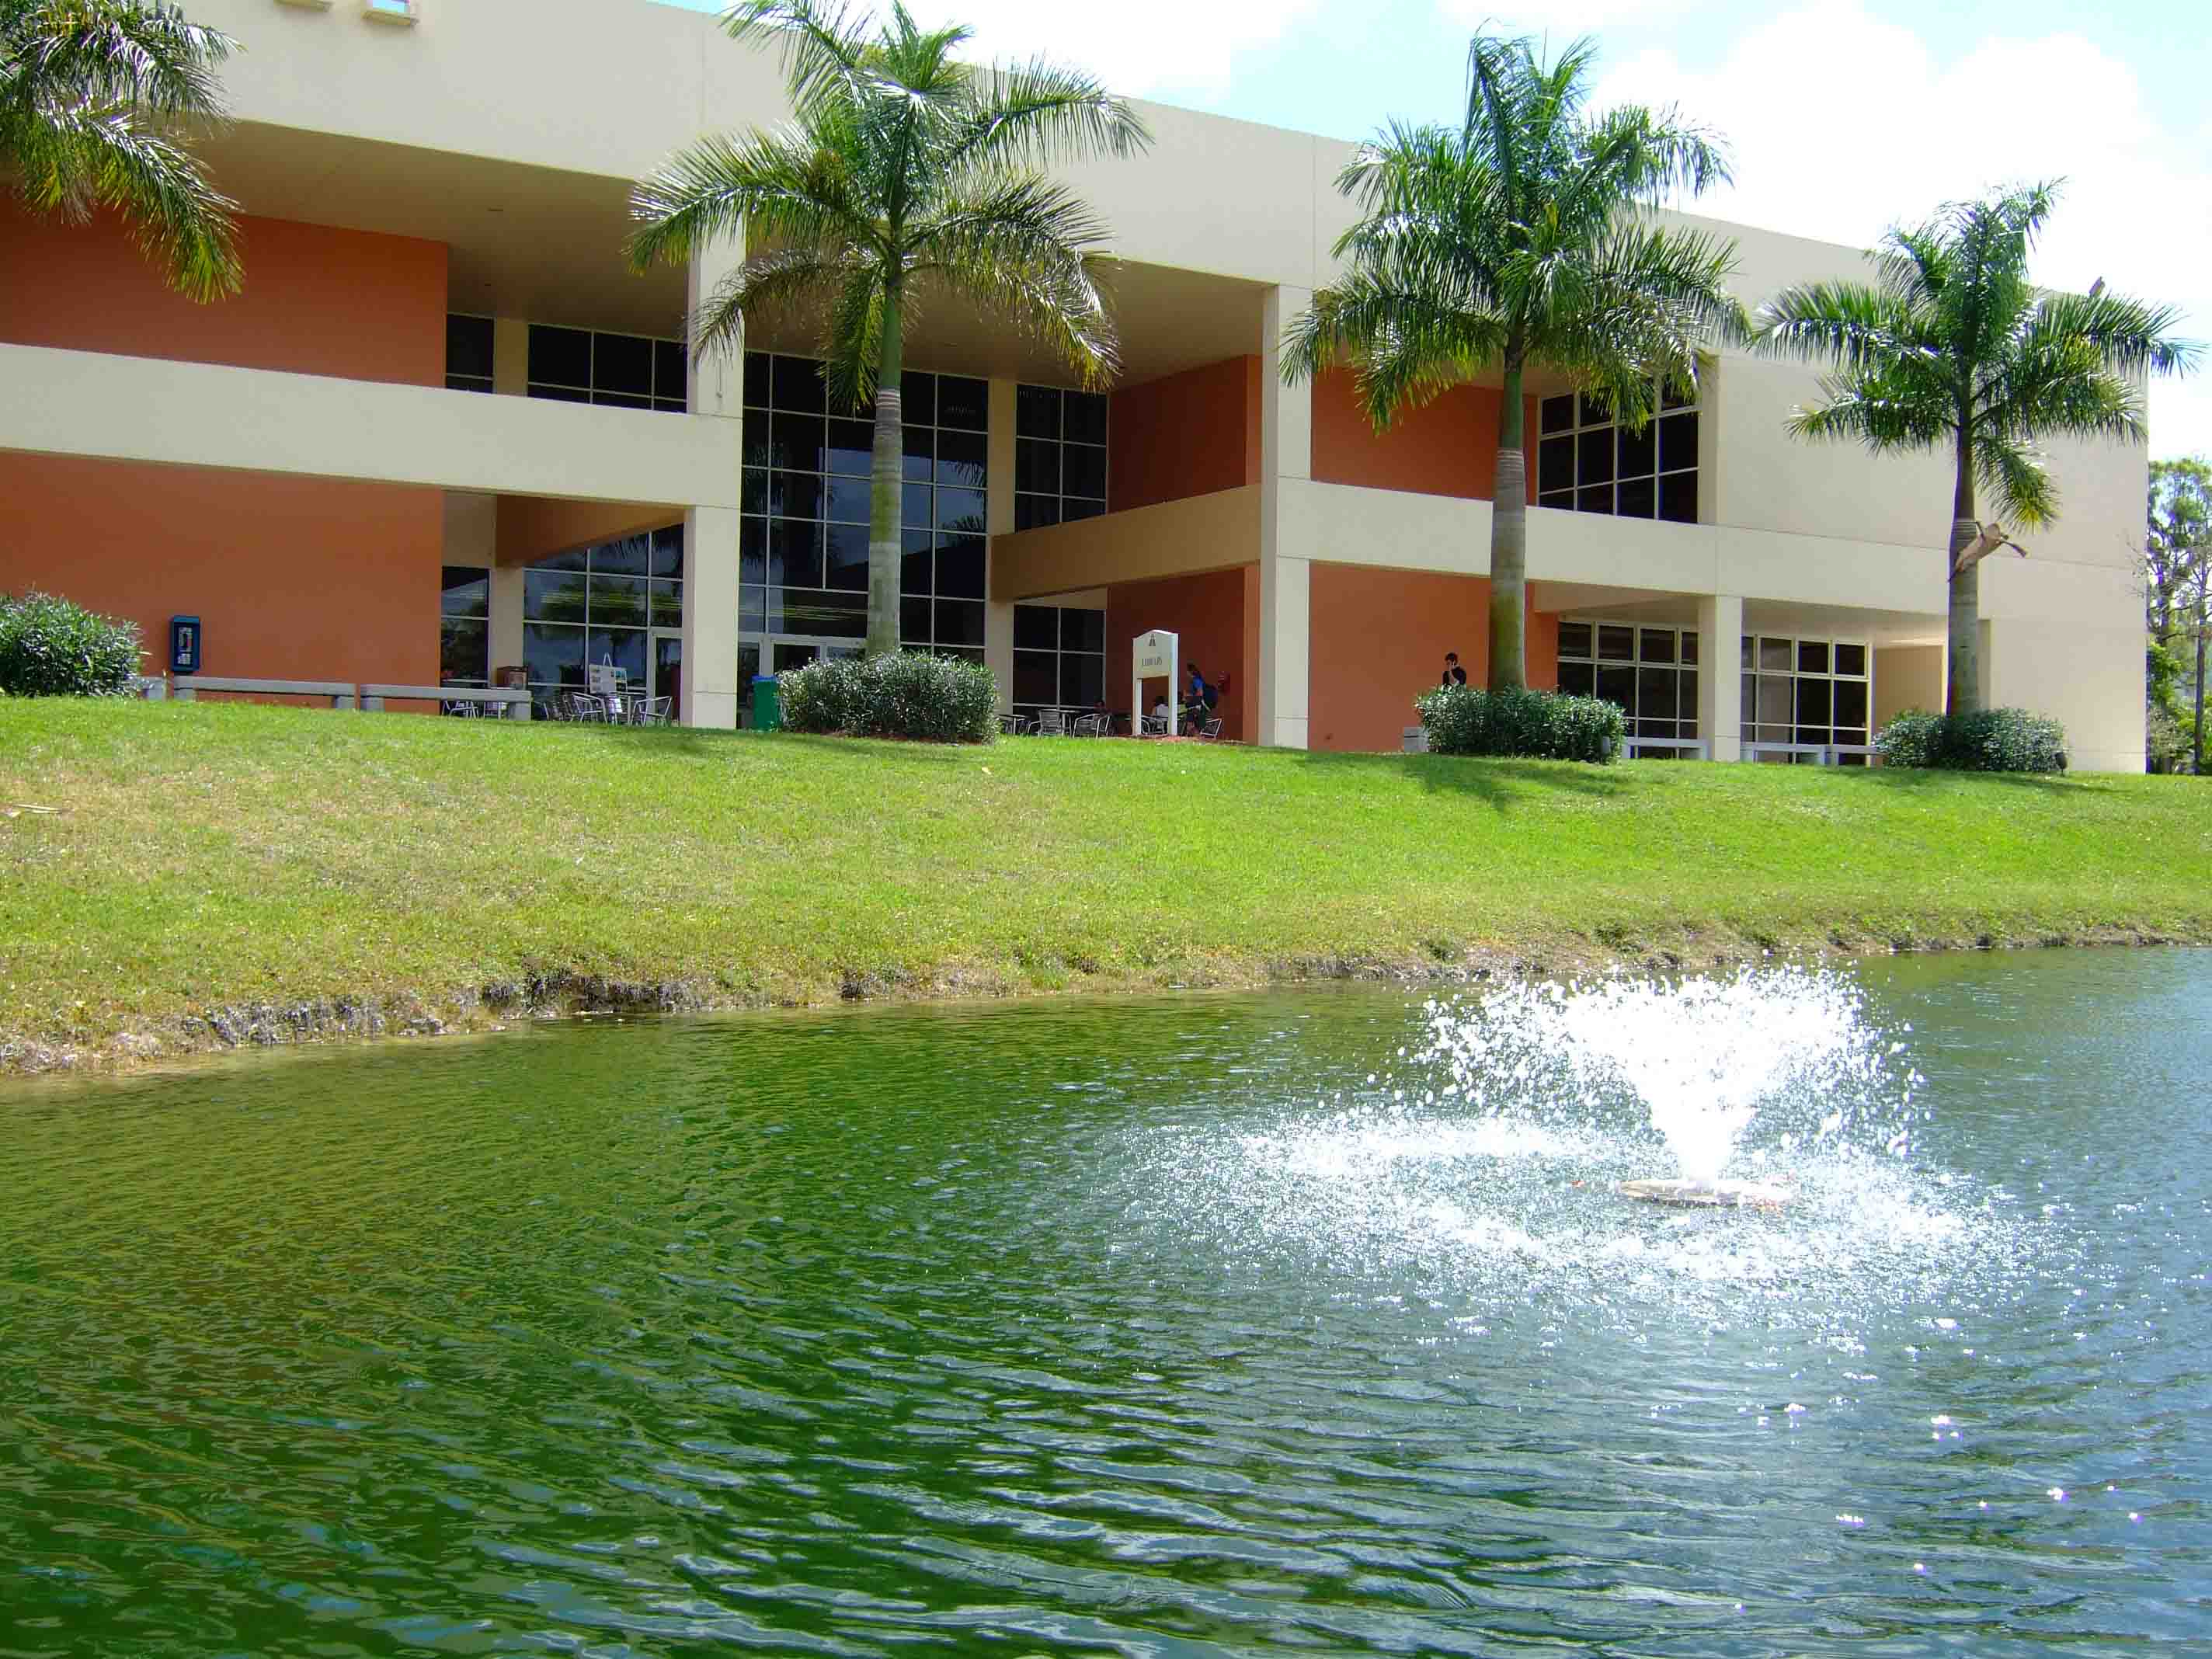 Library building and lake